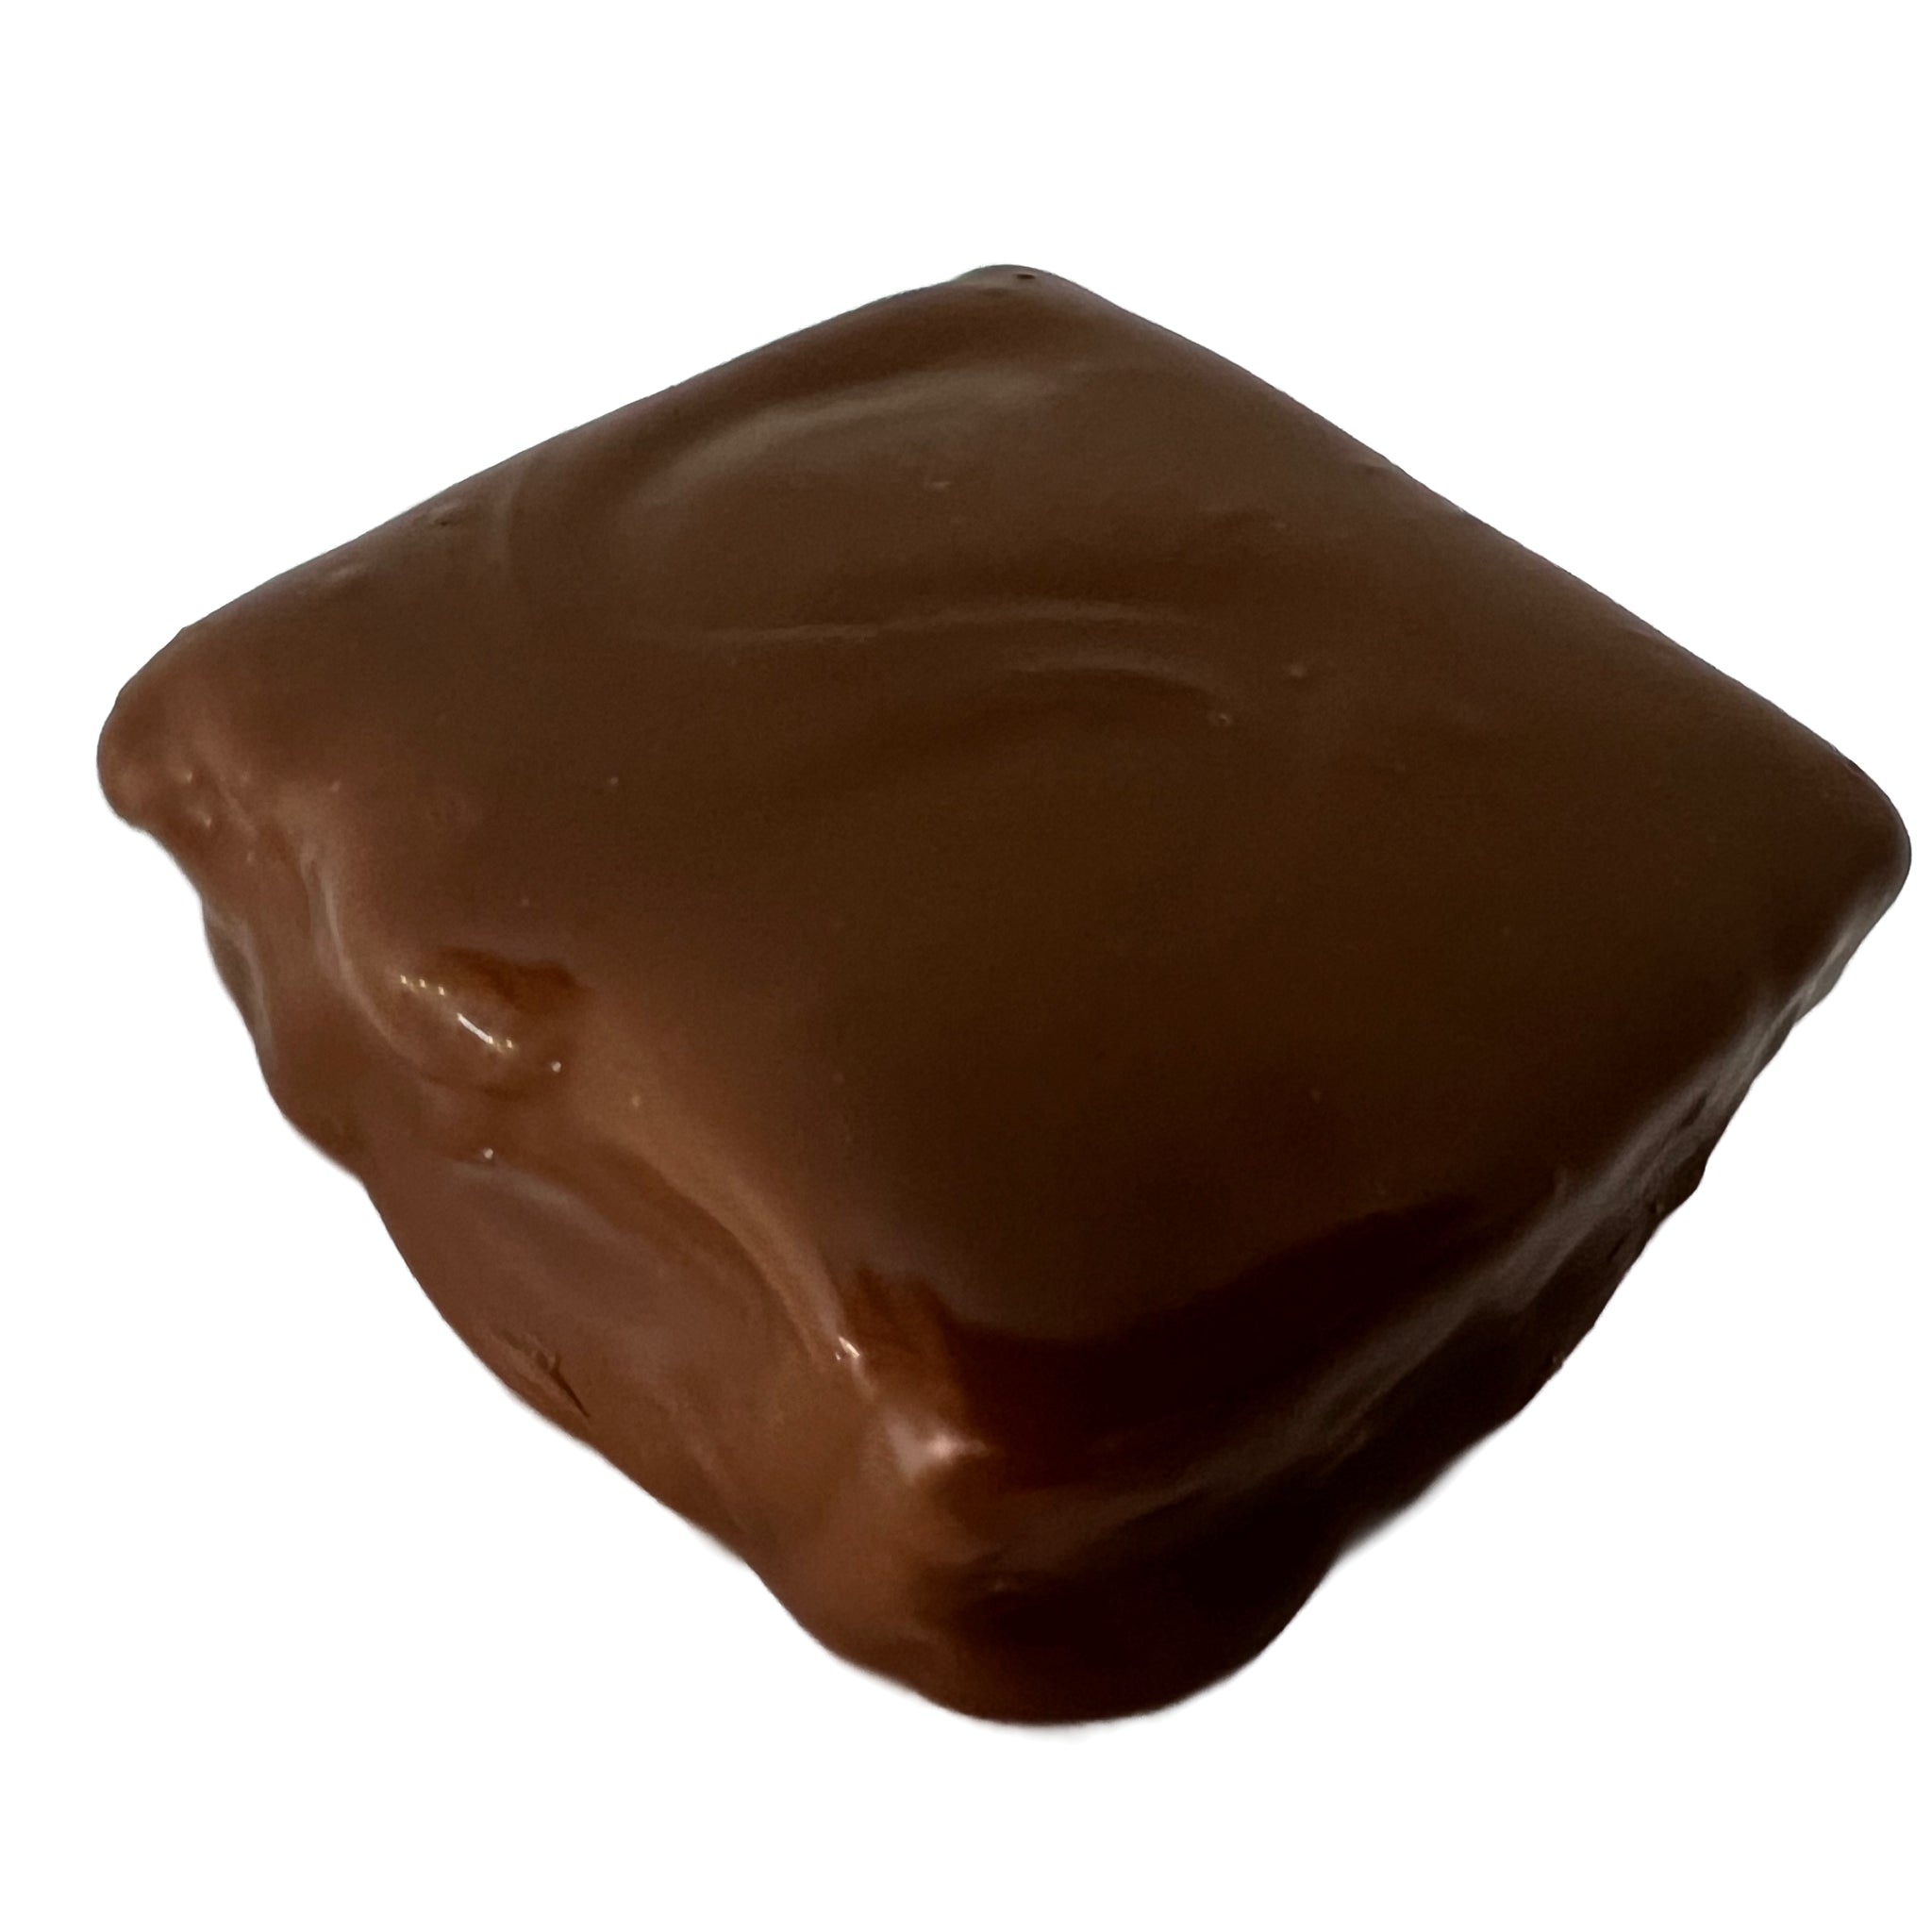 Large square of thick milk chocolate 